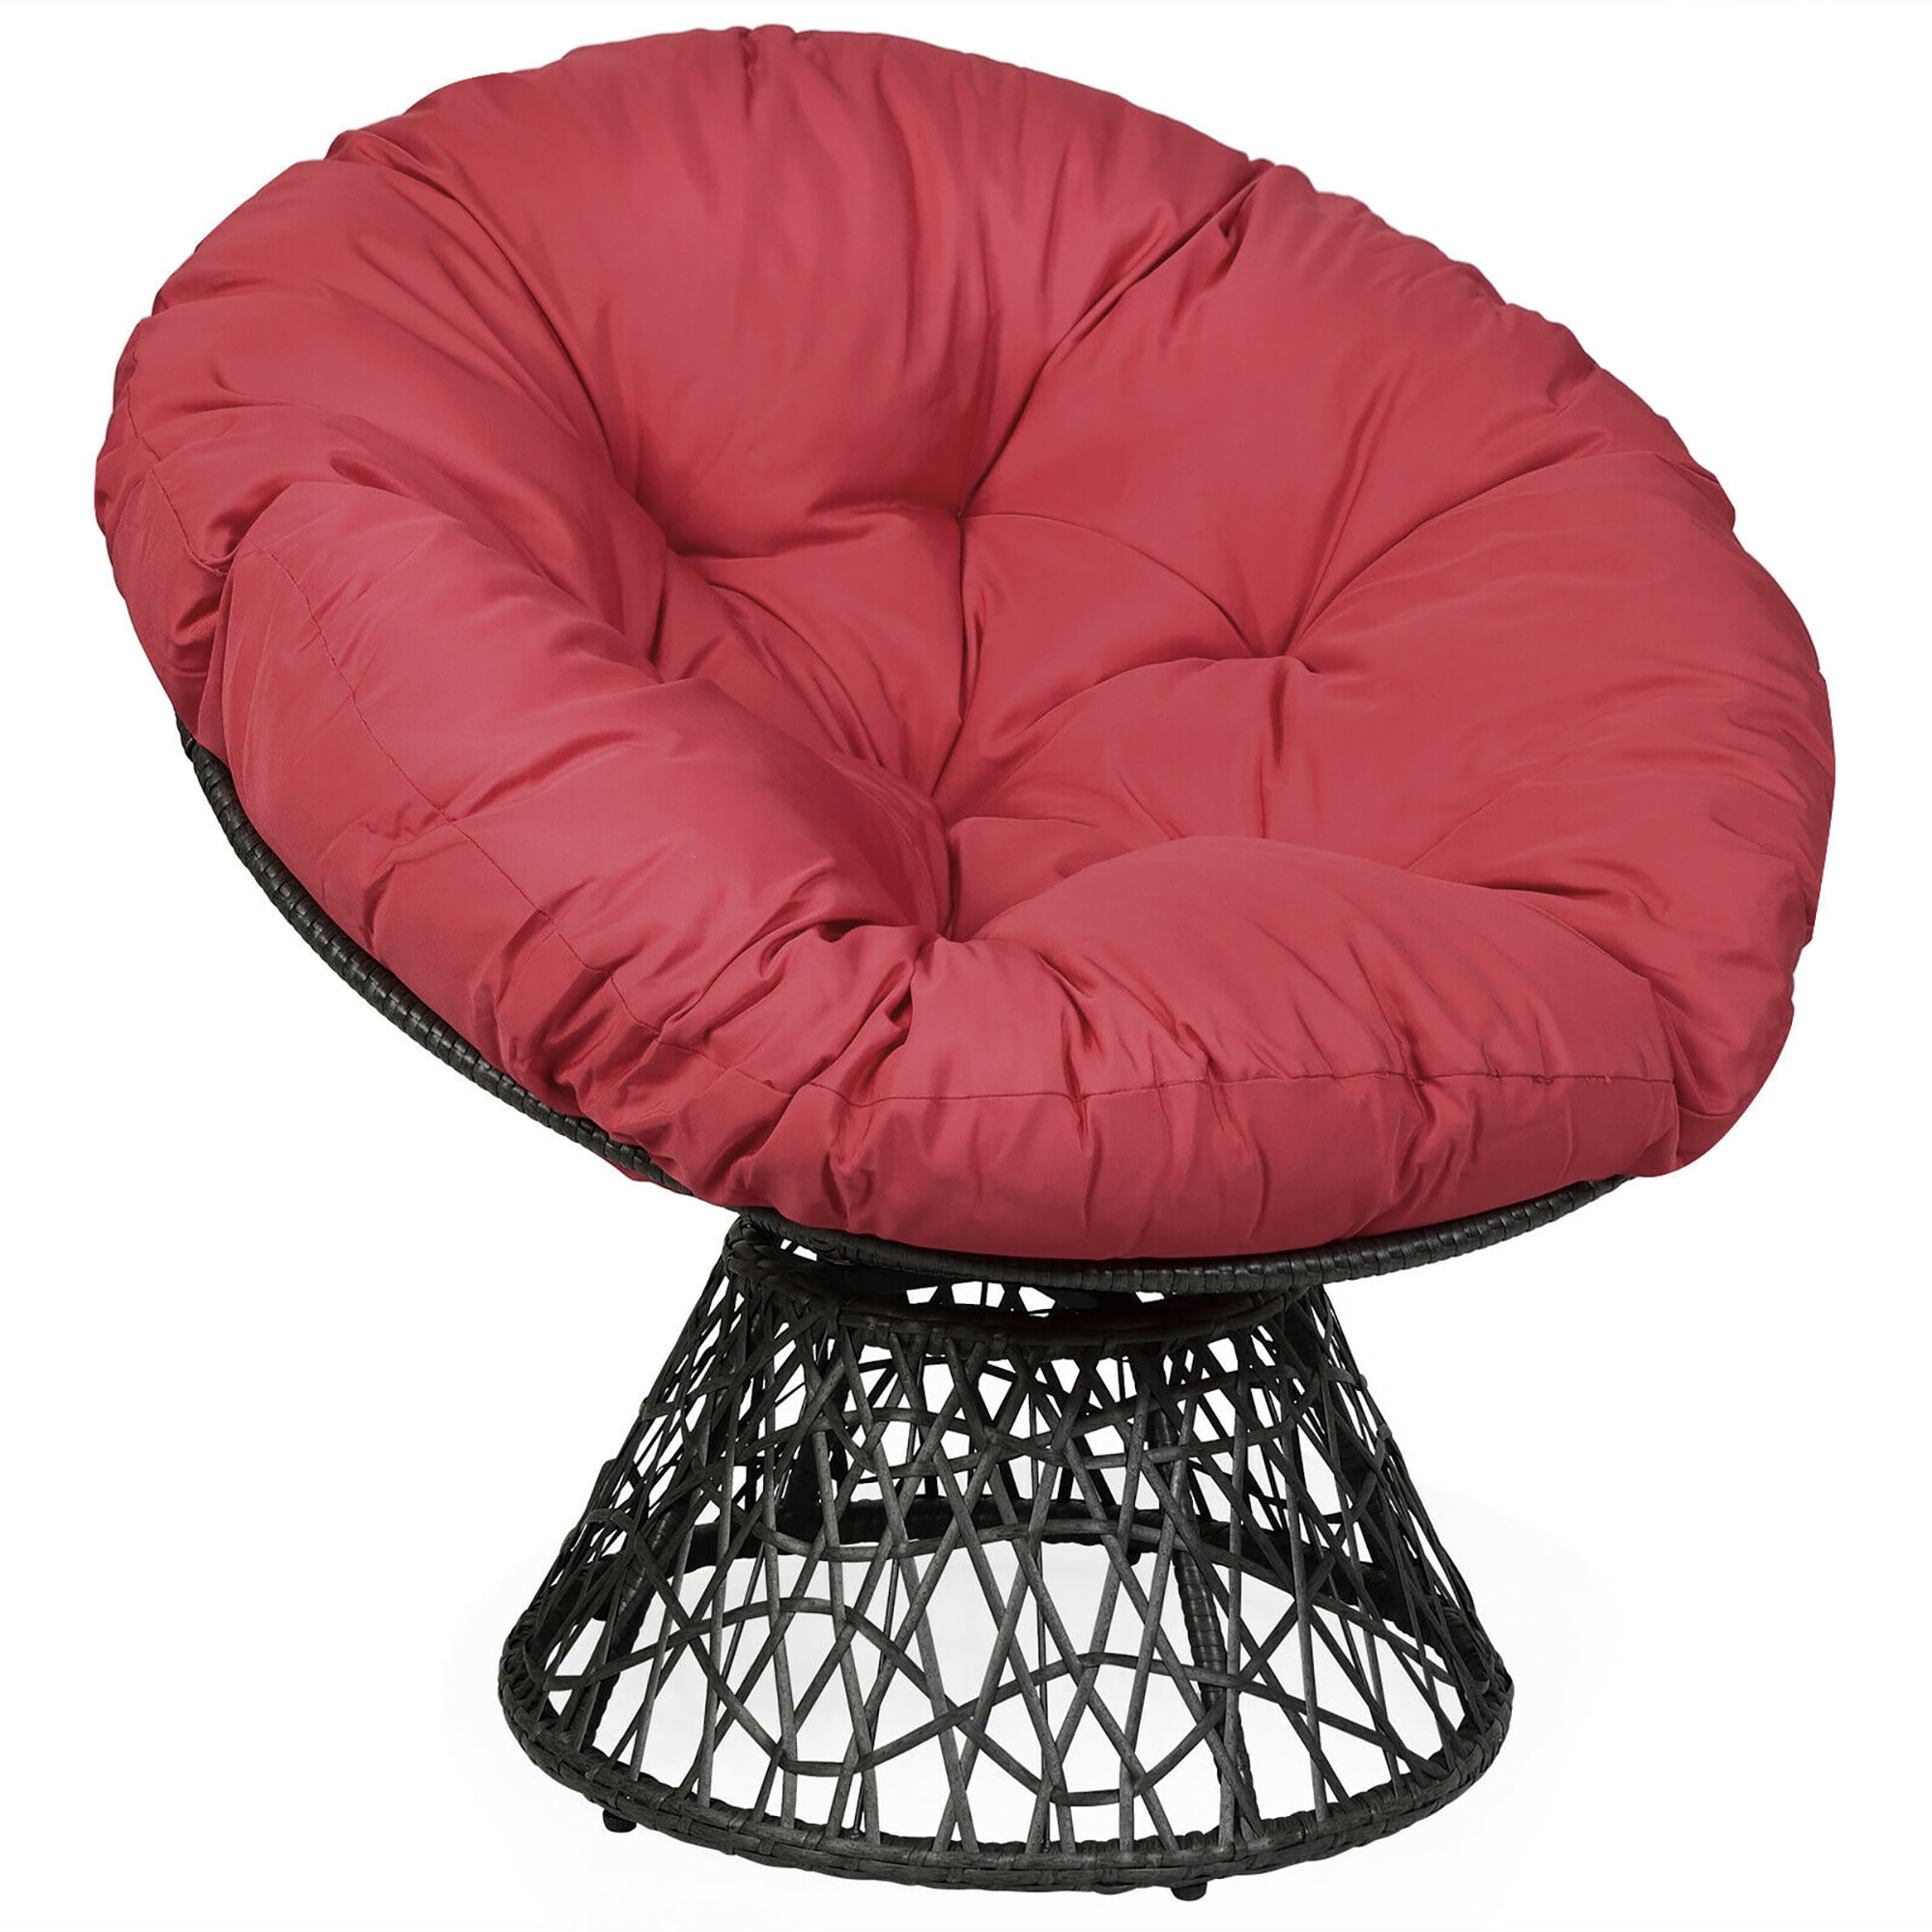 Bme Ergonomic Wicker Papasan Chair with Soft Thick Density Fabric Cushion, High Capacity Steel Frame, 360 Degree Swivel for Livi